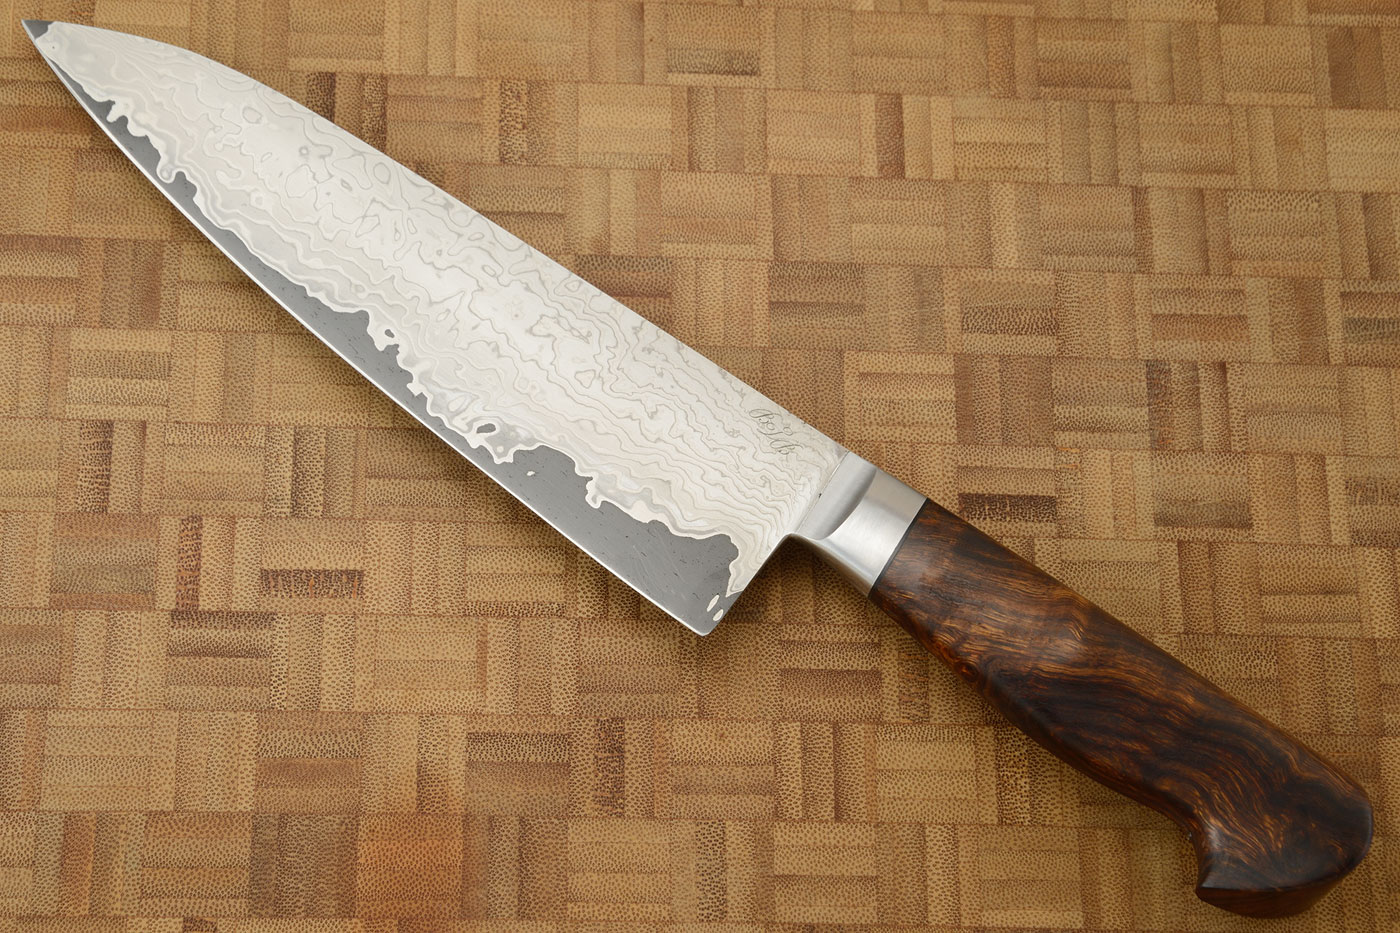 Chef's Knife (Gyuto) with Stainless Damascus San Mai and Ironwood (7-1/4 inches)